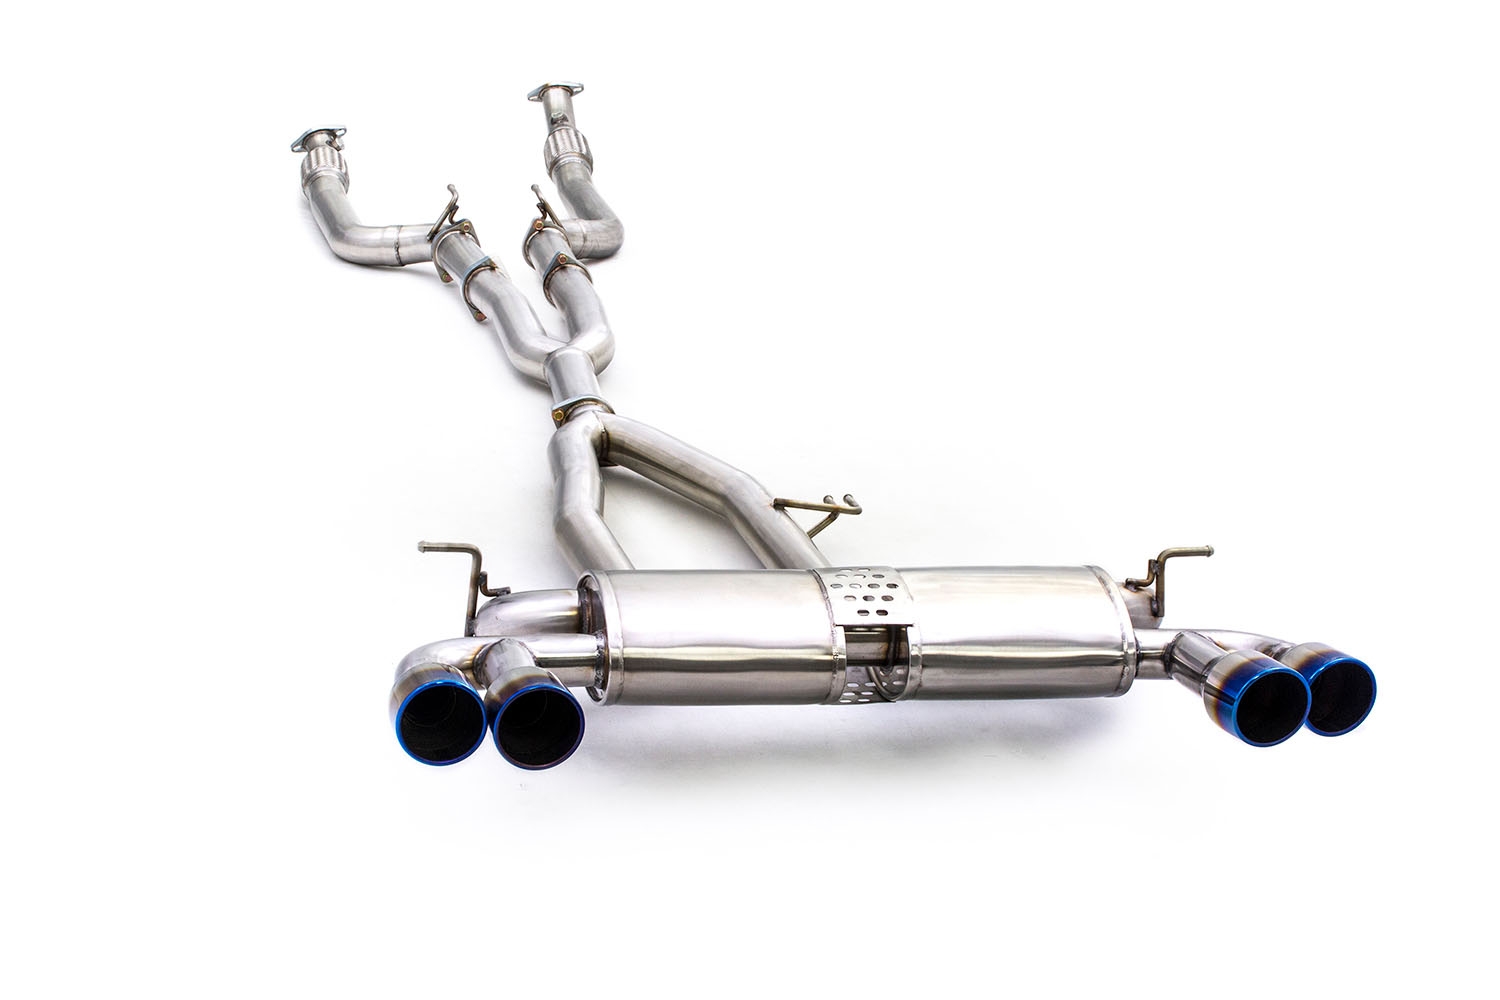 Ark Performance Stainless Steel DT-S Cat-Back Exhaust System 3.0in Pipe w/ 4.0 Burnt Dual Tip, Dual Exit - Hyundai Genesis Coupe 09-16 3.8L V6 BK1, BK2